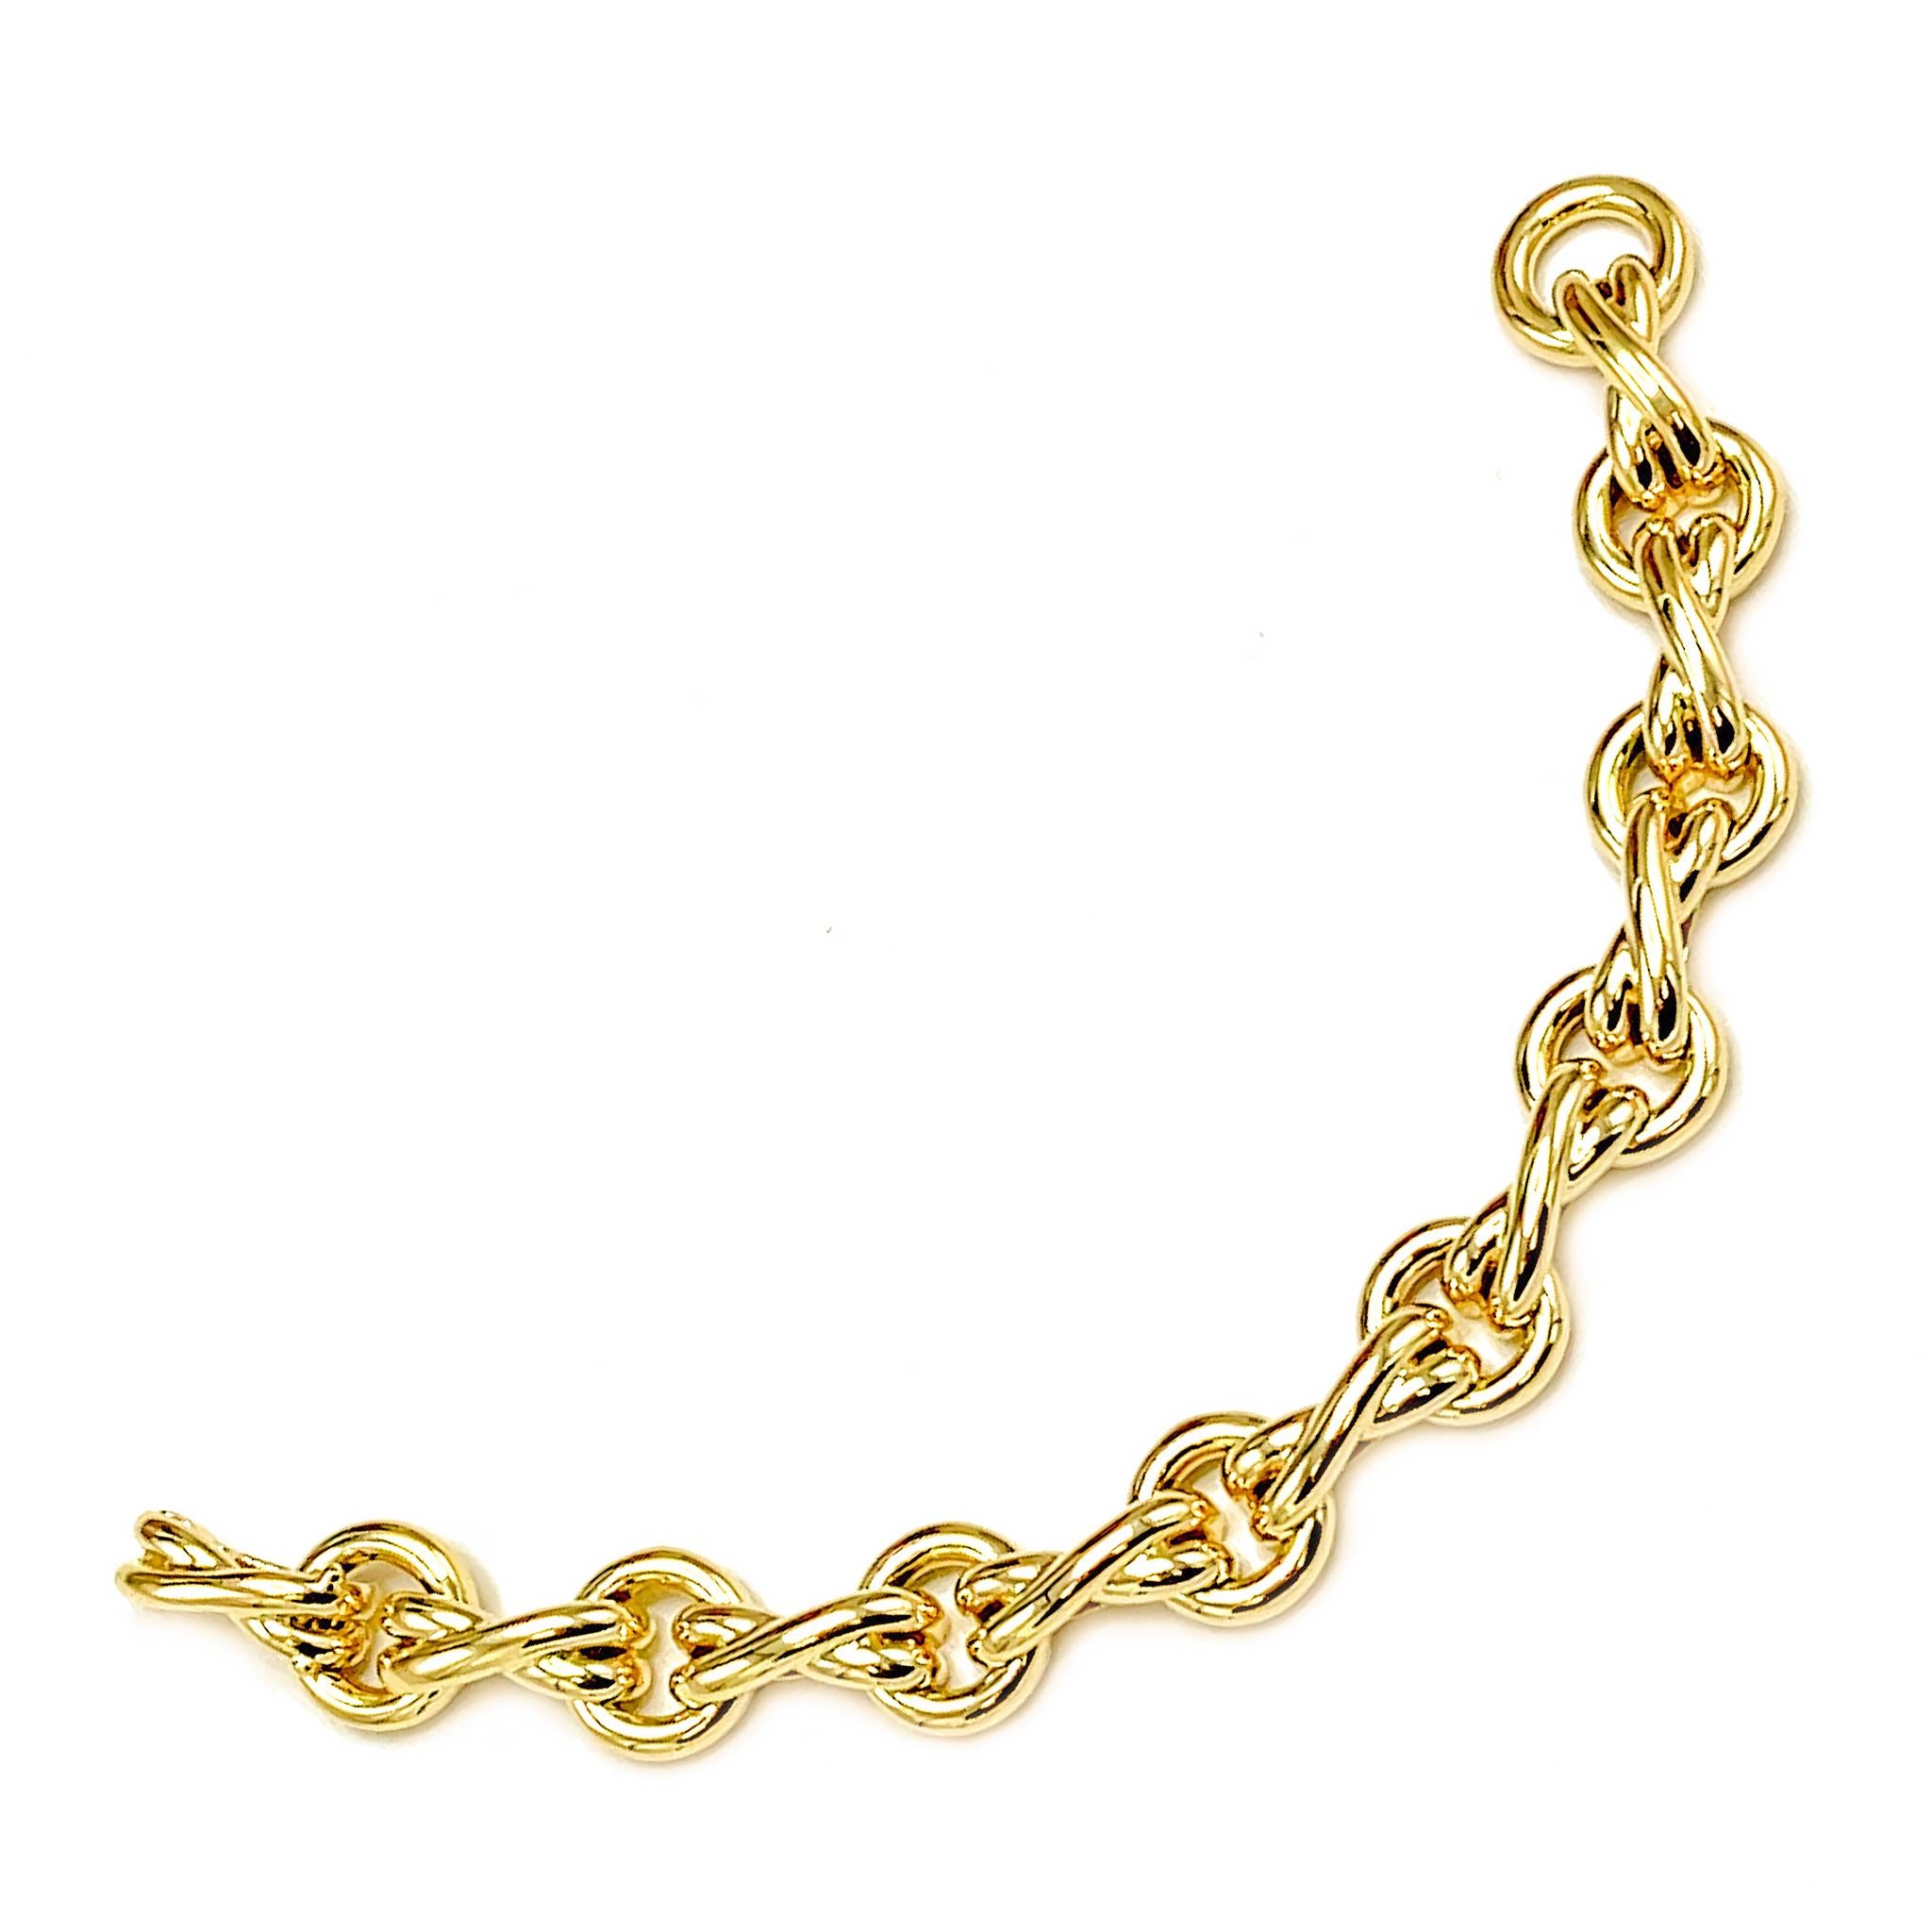 18k Yellow Gold
Weight: 42.4 grams
Length: 6.75 inches